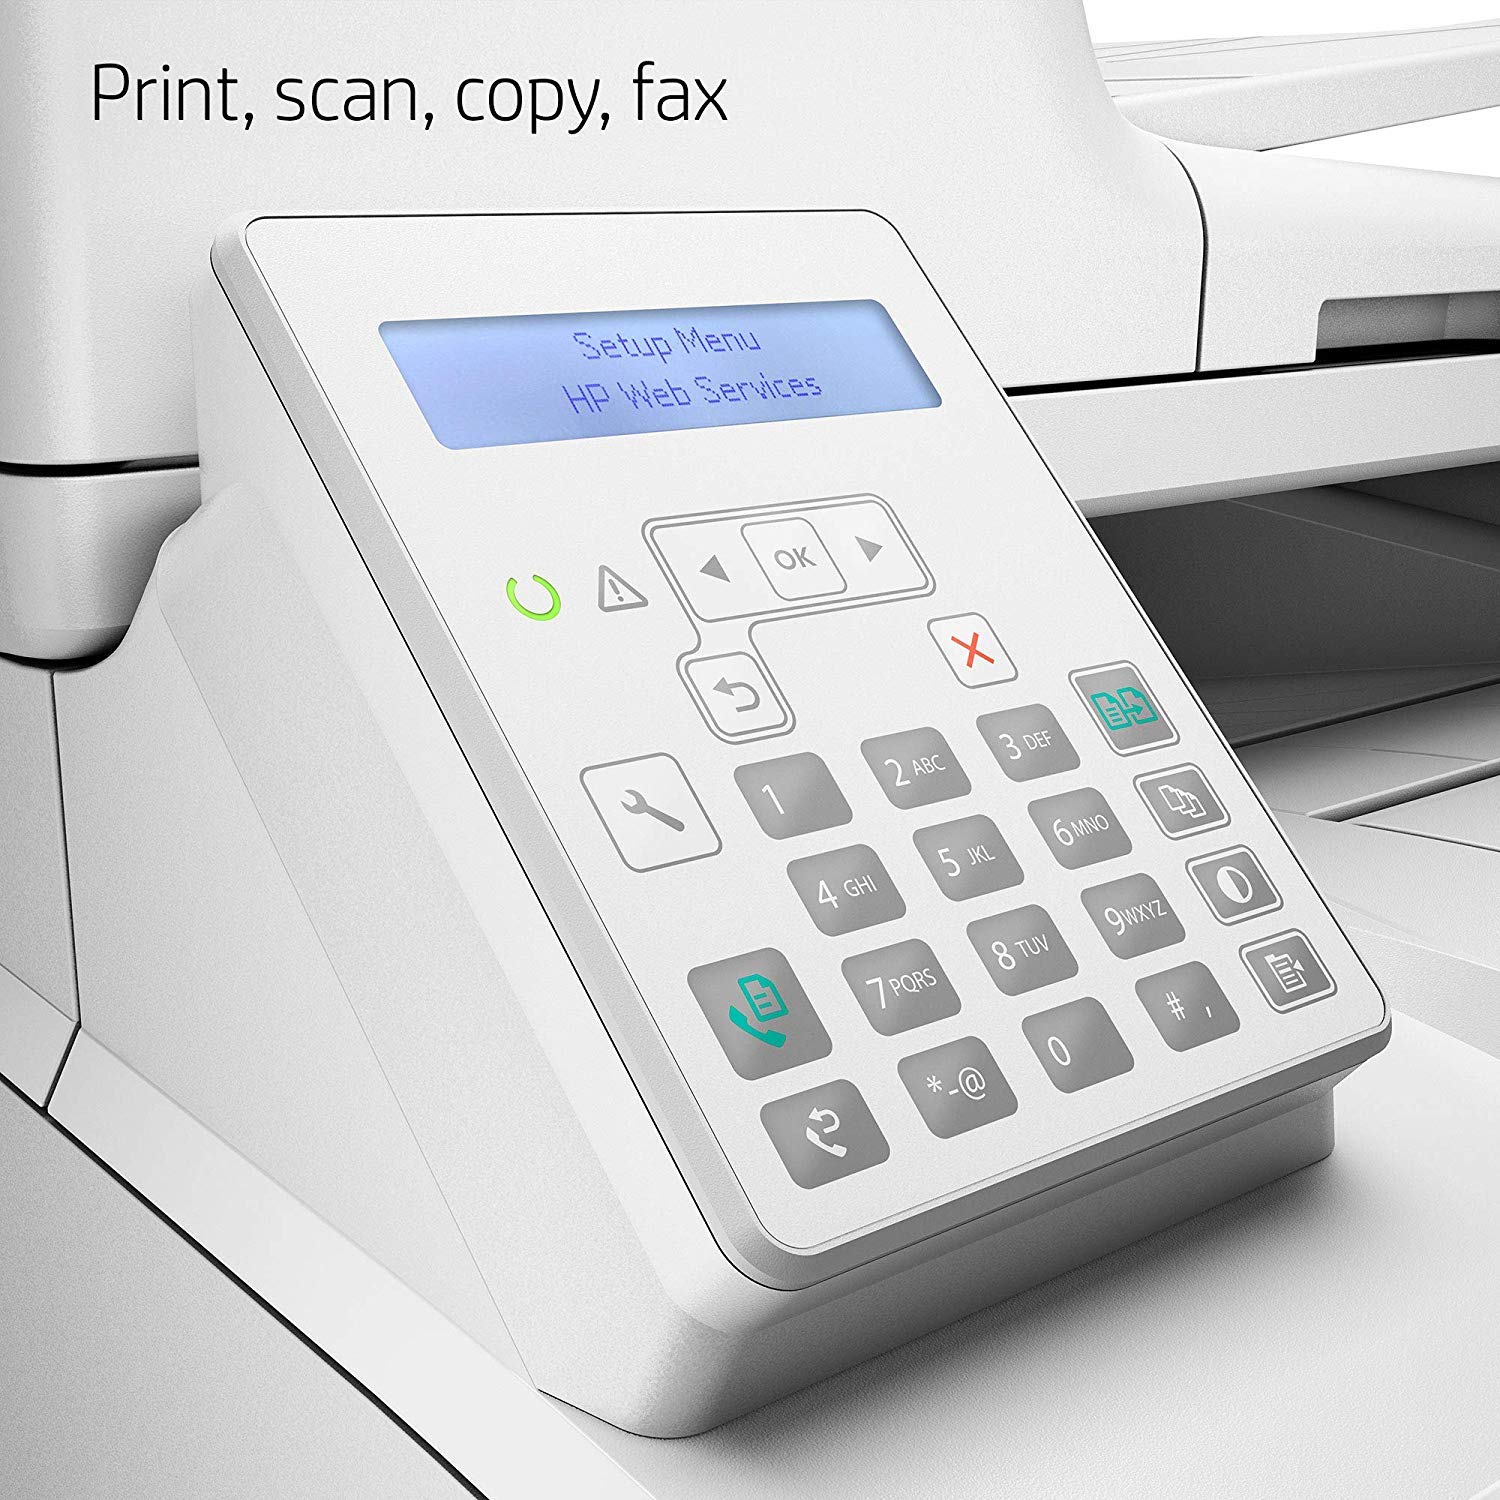 HP LaserJet Pro MFP M227fdn Monochrome All-in-One Printer with built-in Ethernet & 2-sided printing, (G3Q79A)